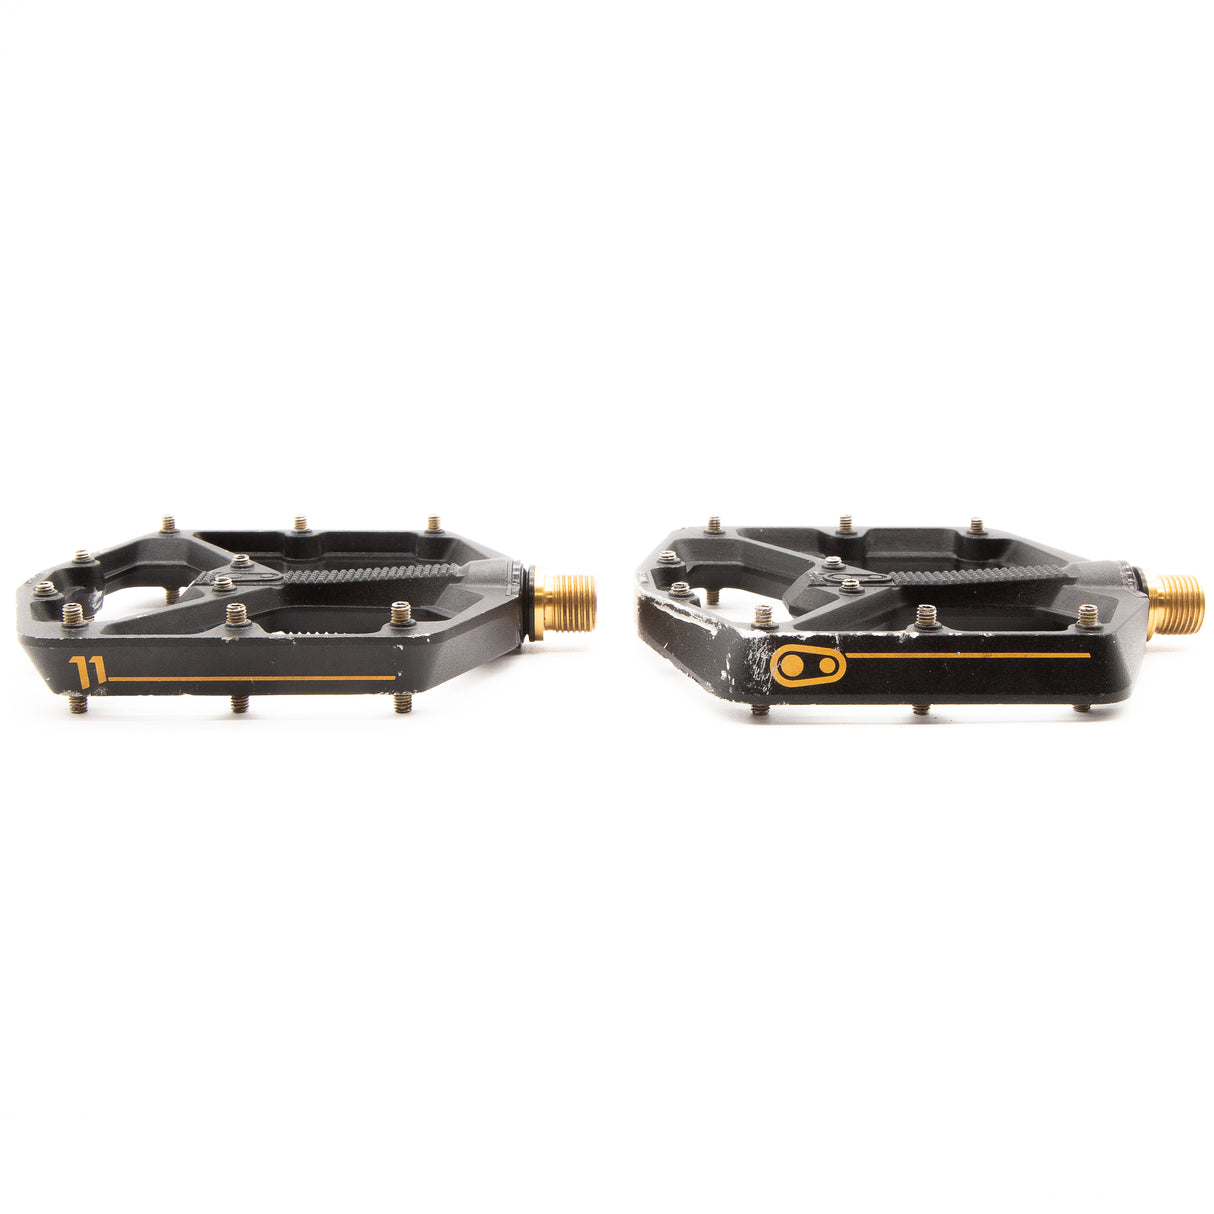 Crank Brothers Stamp 11 Large Pedals Black/Gold 330g